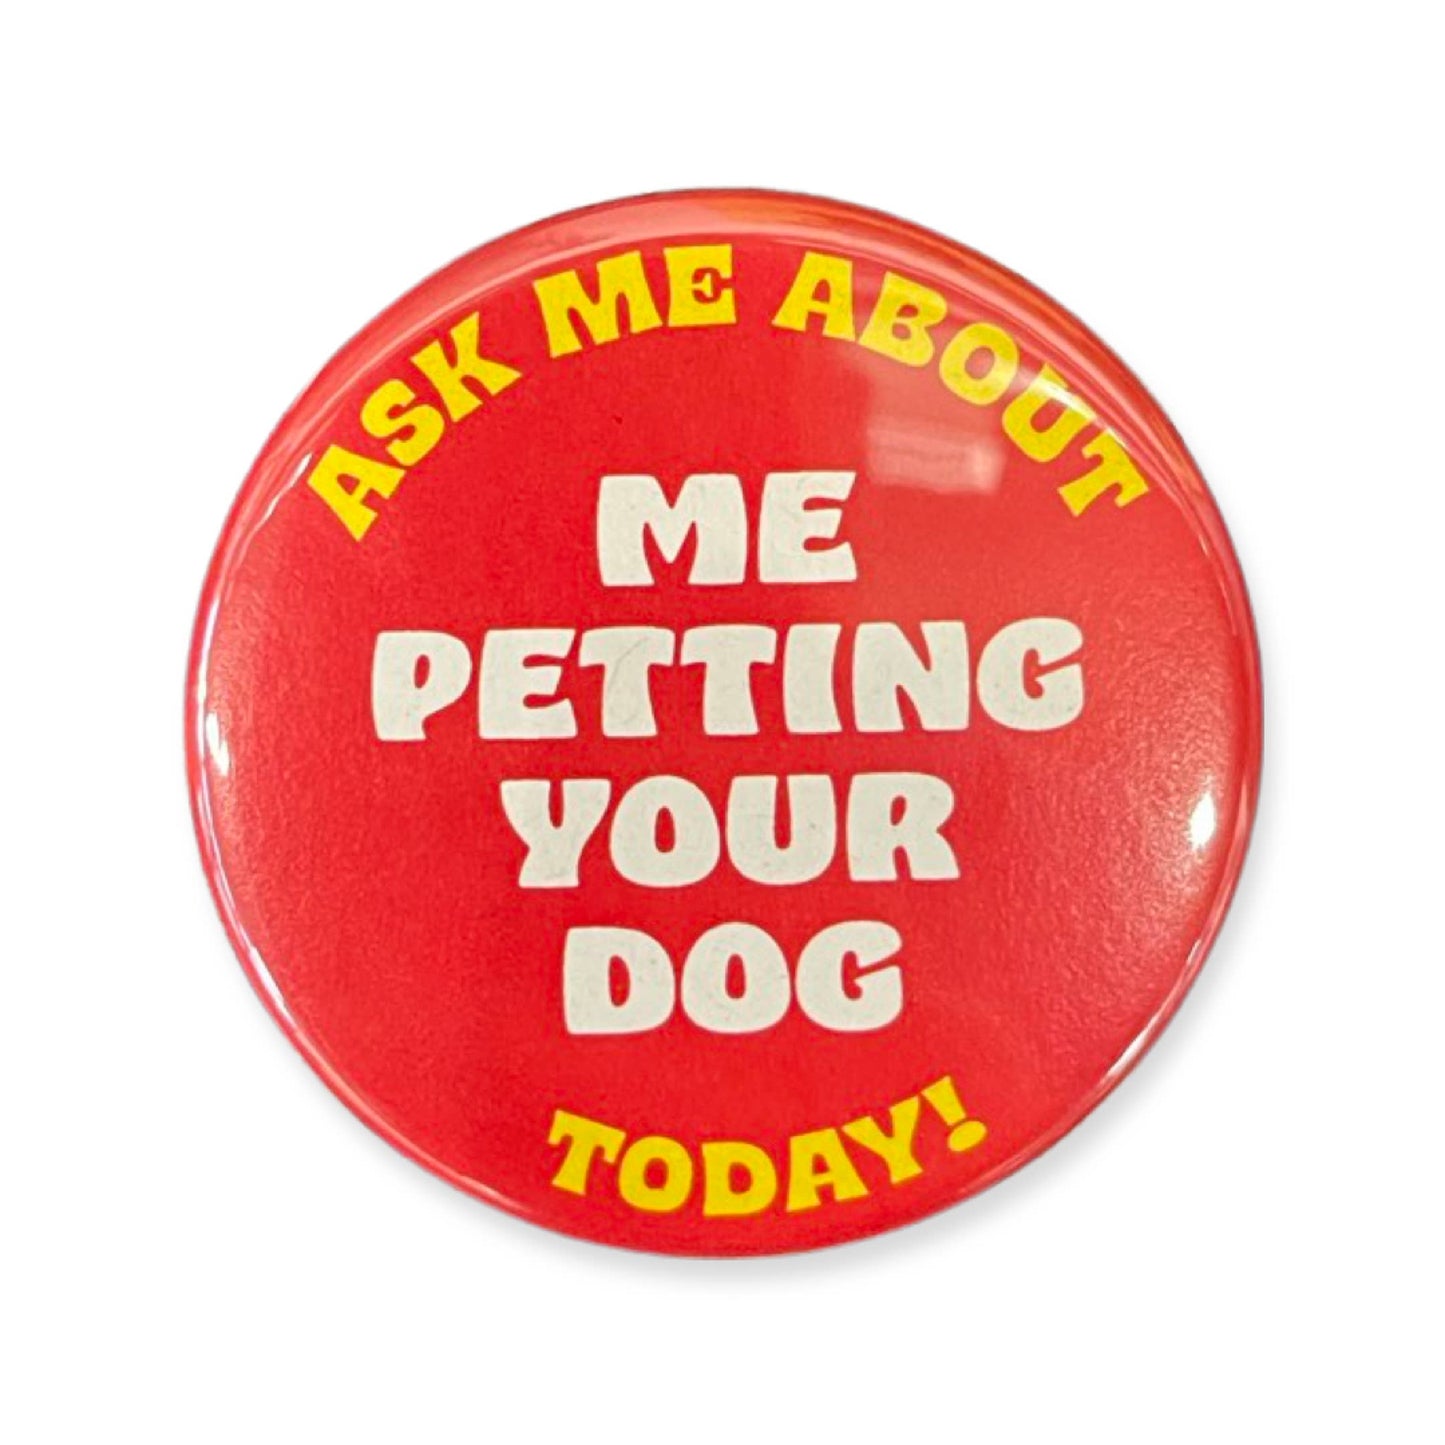 World Famous Original - Ask Me About Me Petting Your Dog Button - 1.75"